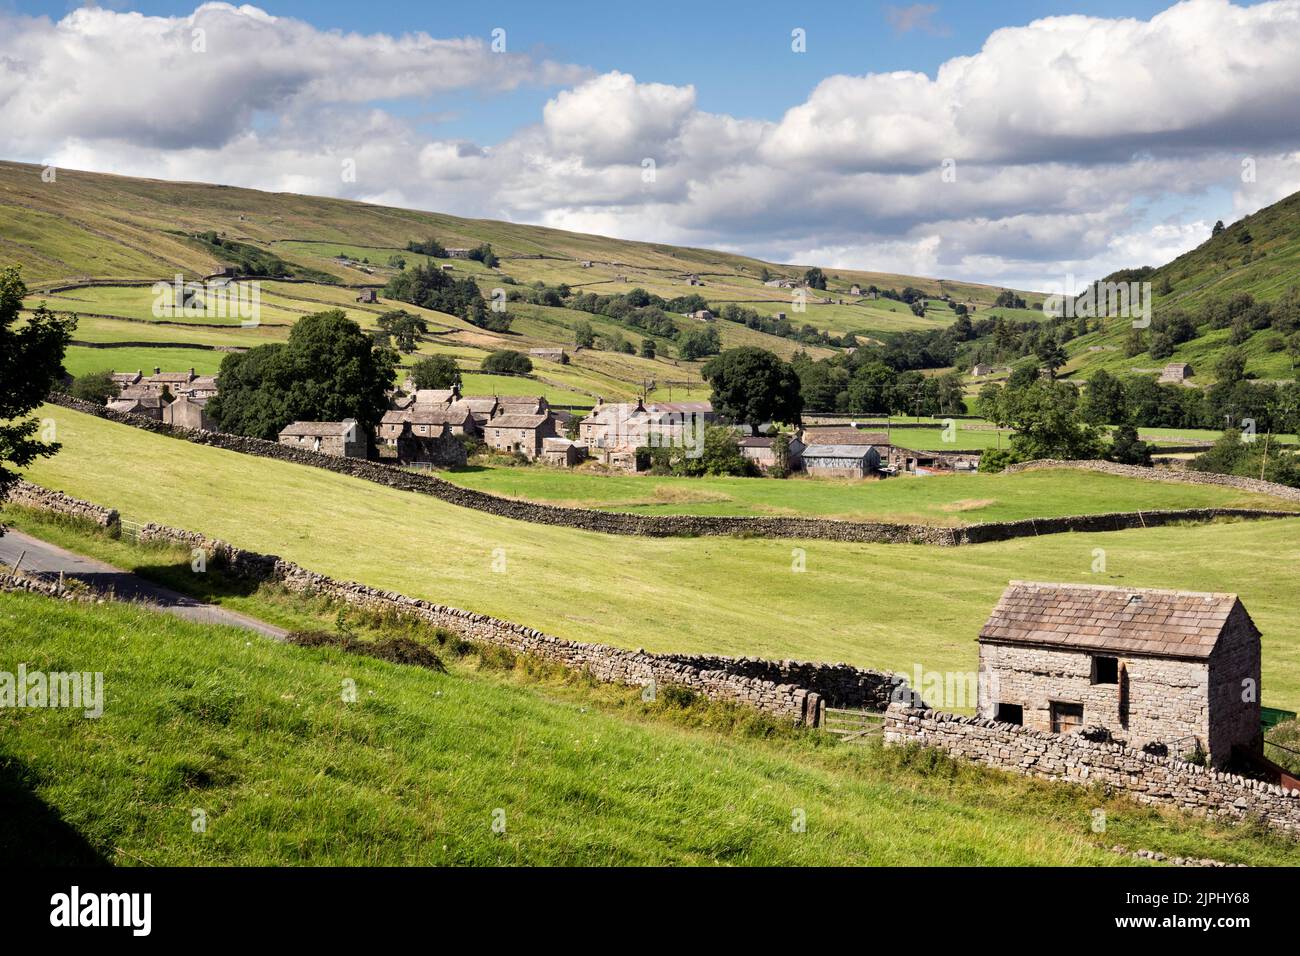 The village of Thwaite in Swaledale, Yorkshire Dales National Park, UK Stock Photo